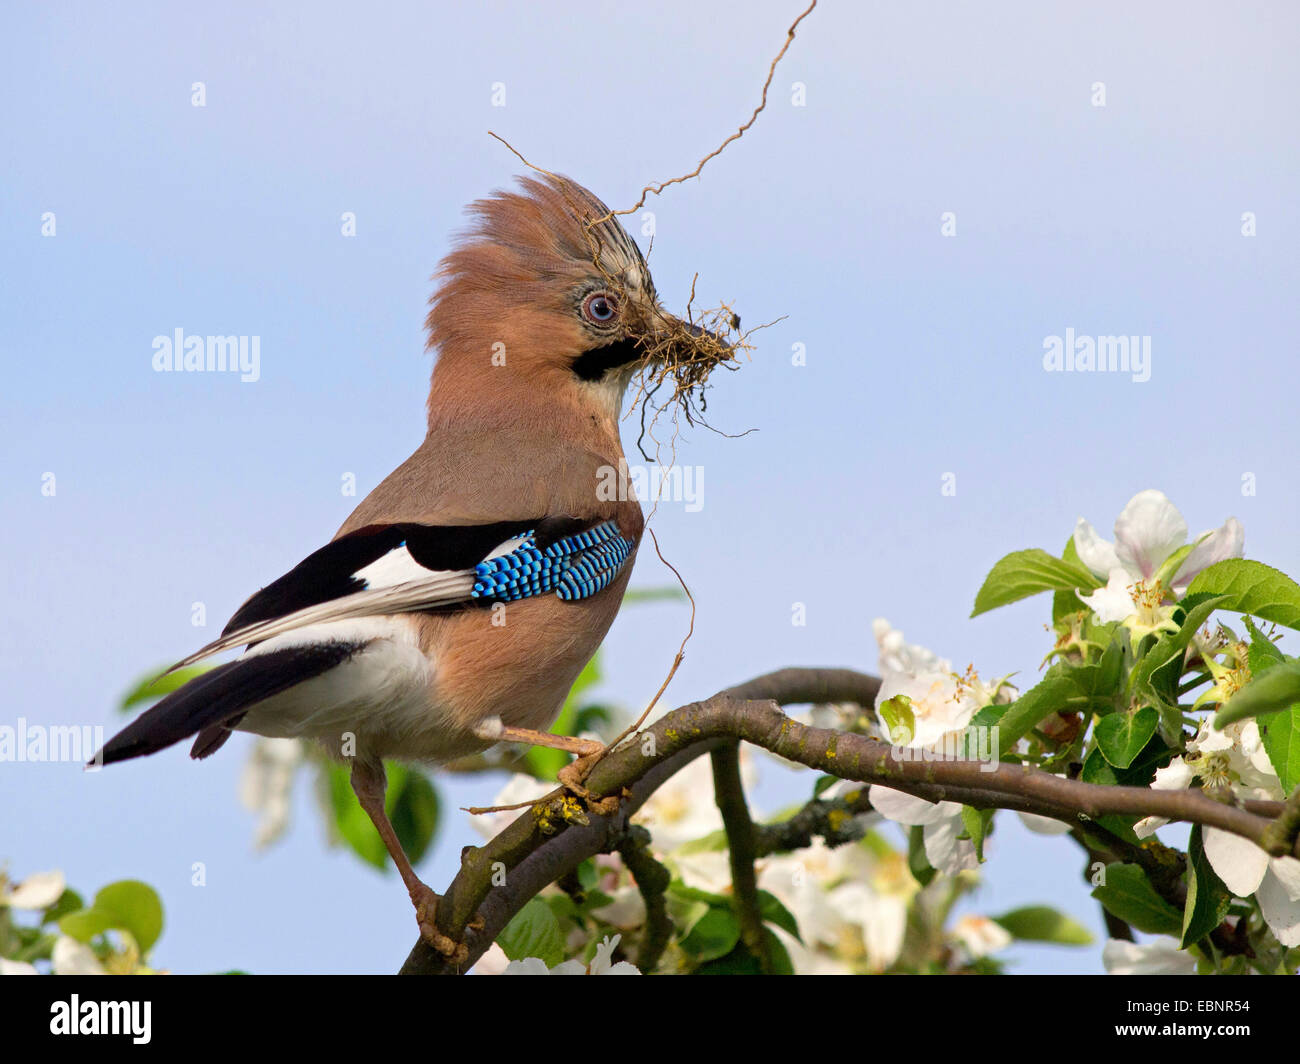 jay (Garrulus glandarius), sitting in a blooming apple tree with a twig in its beak for nesting, Germany Stock Photo